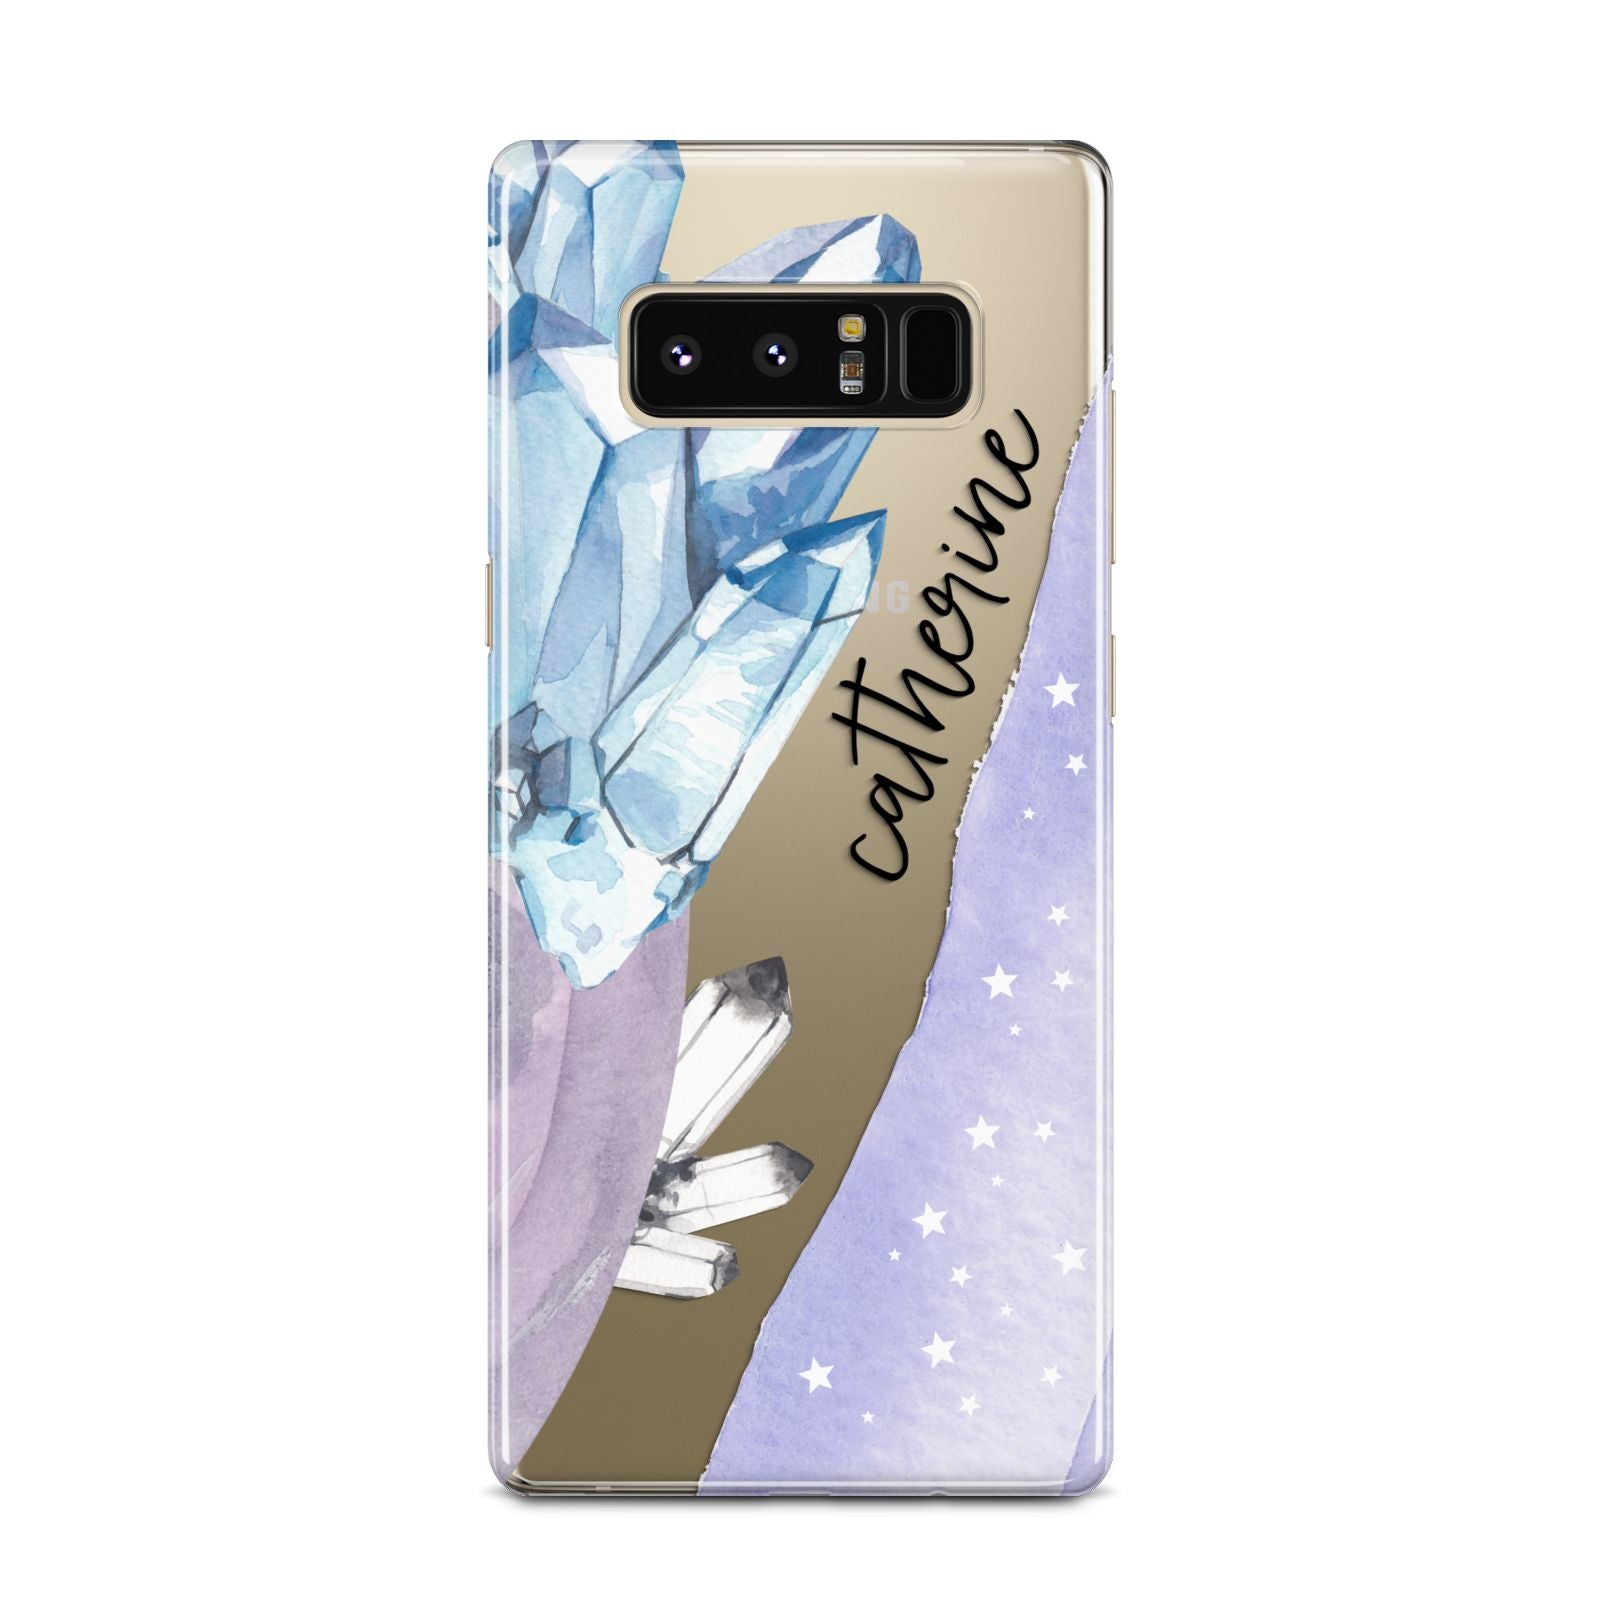 Crystals Personalised Name Samsung Galaxy Note 8 Case